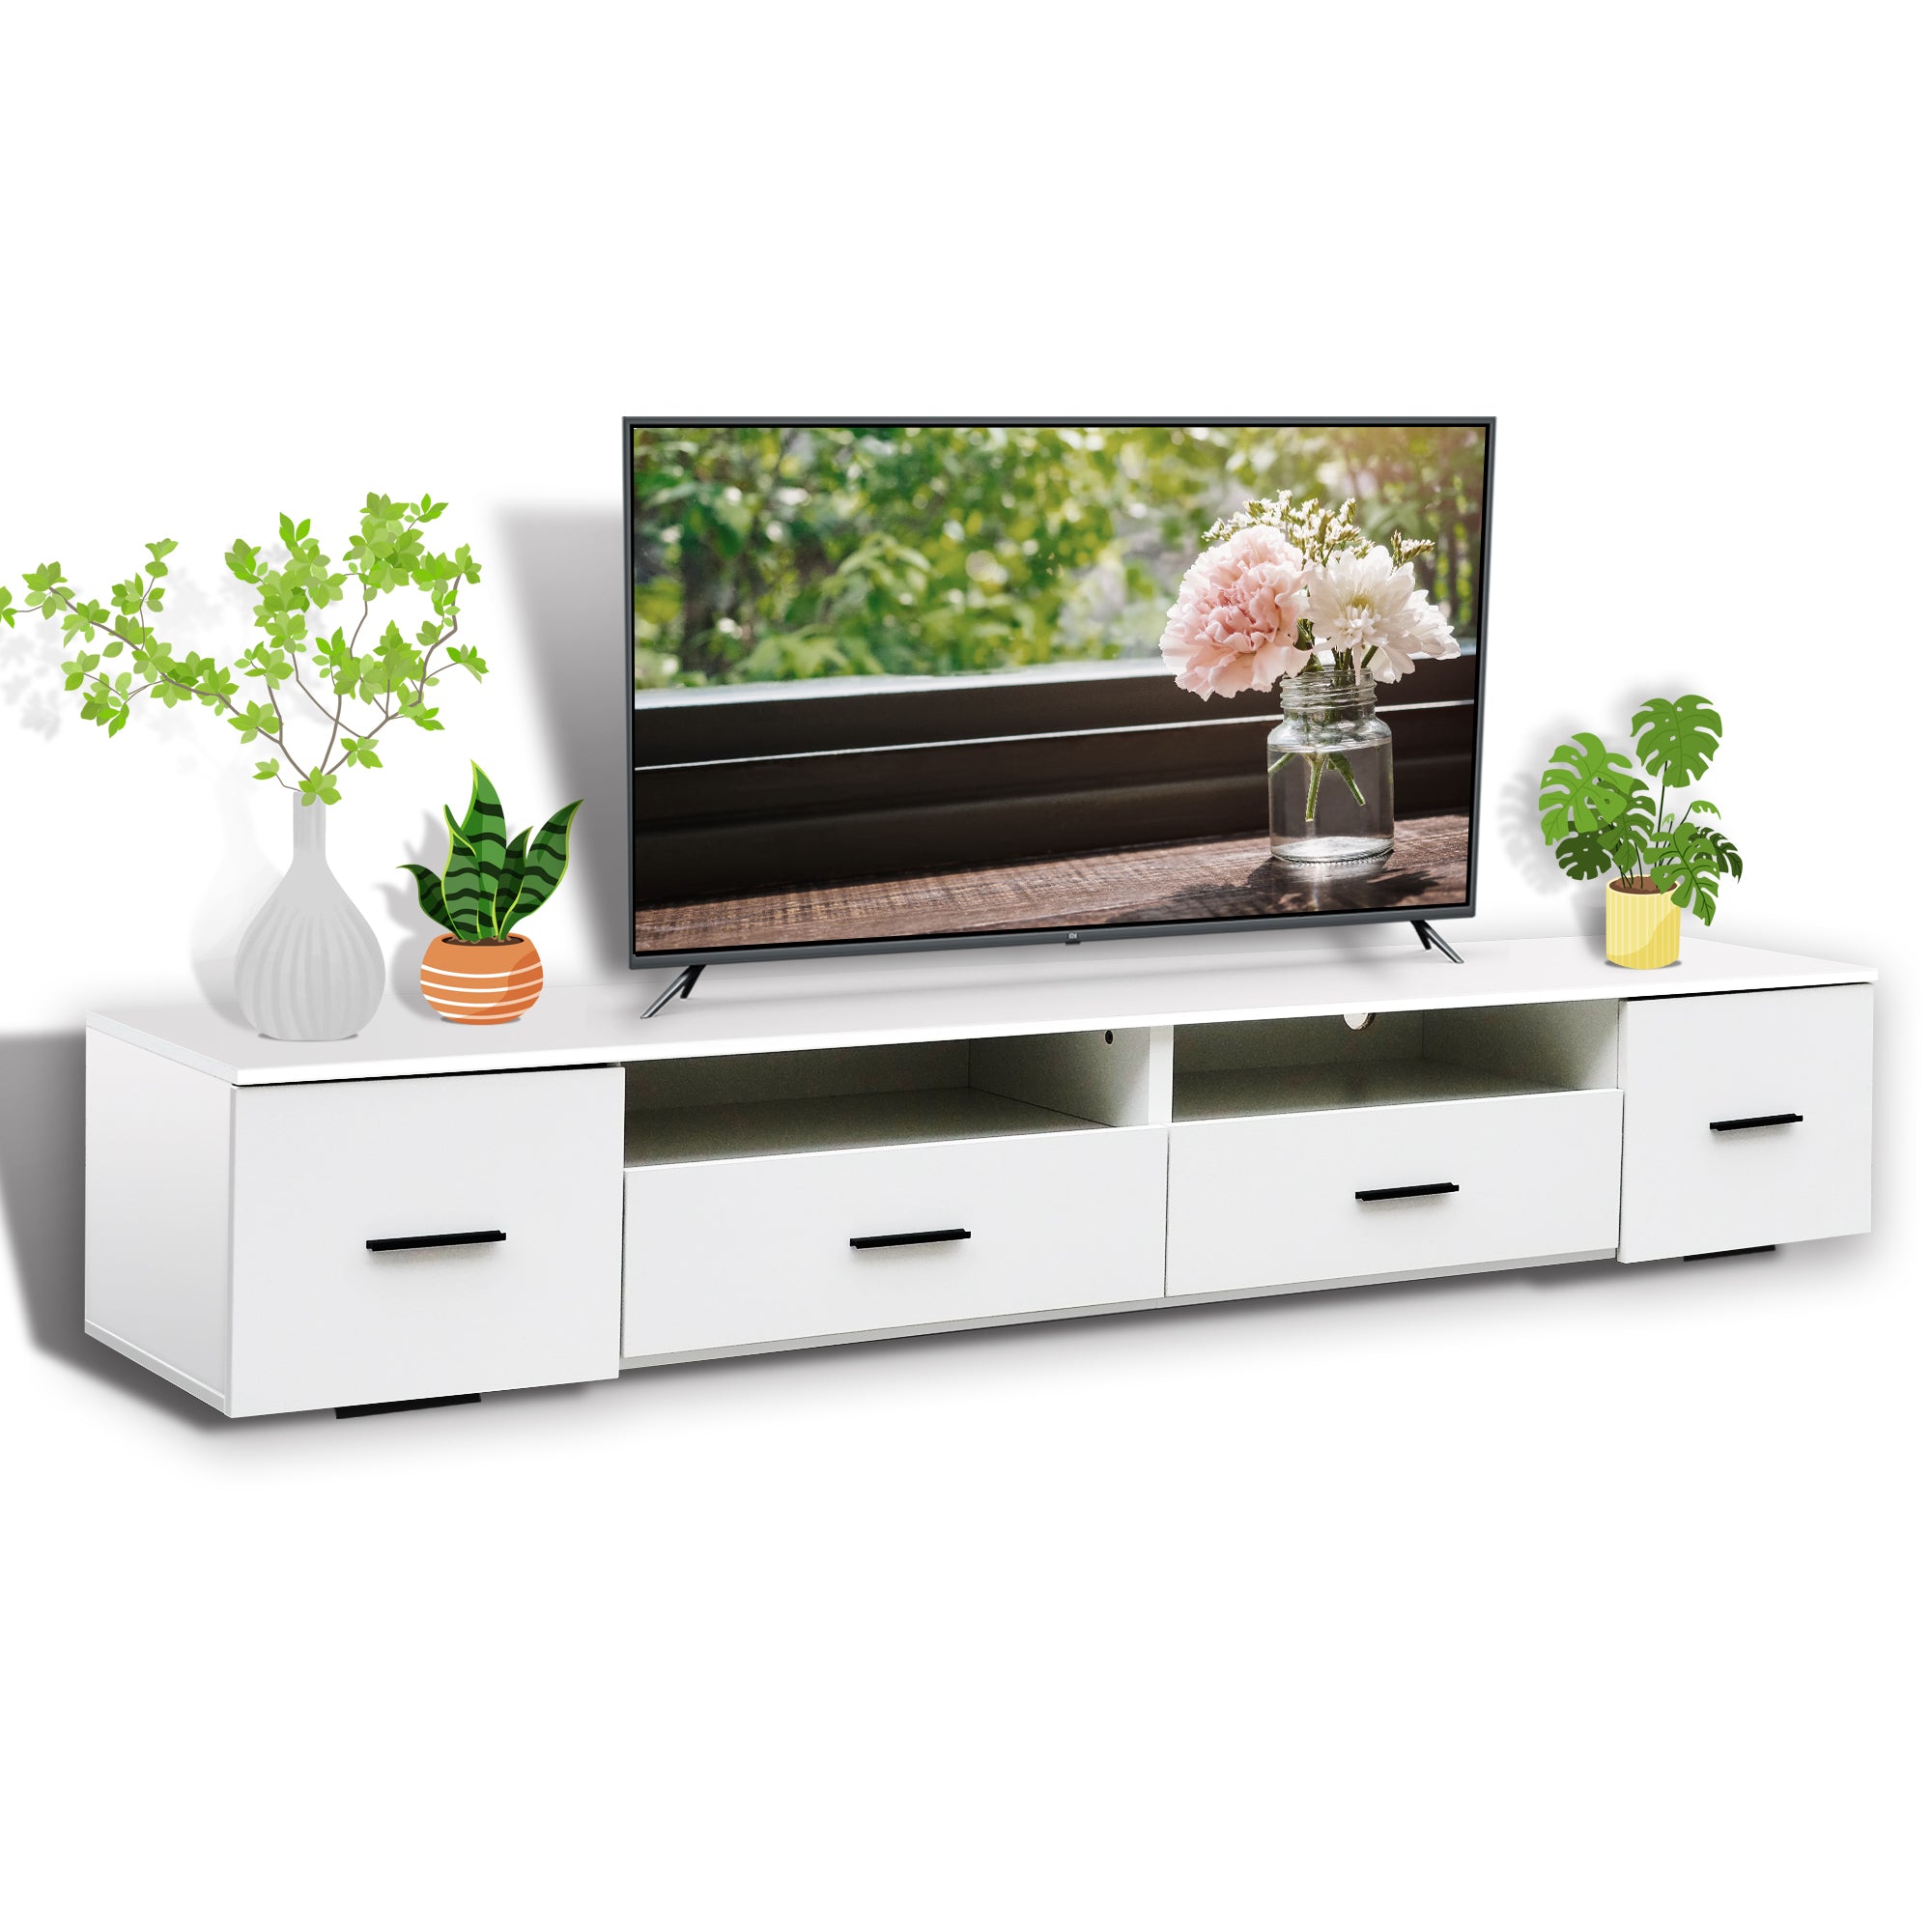 White TV Stand for Living Room, Modern Entertainment white-particle board